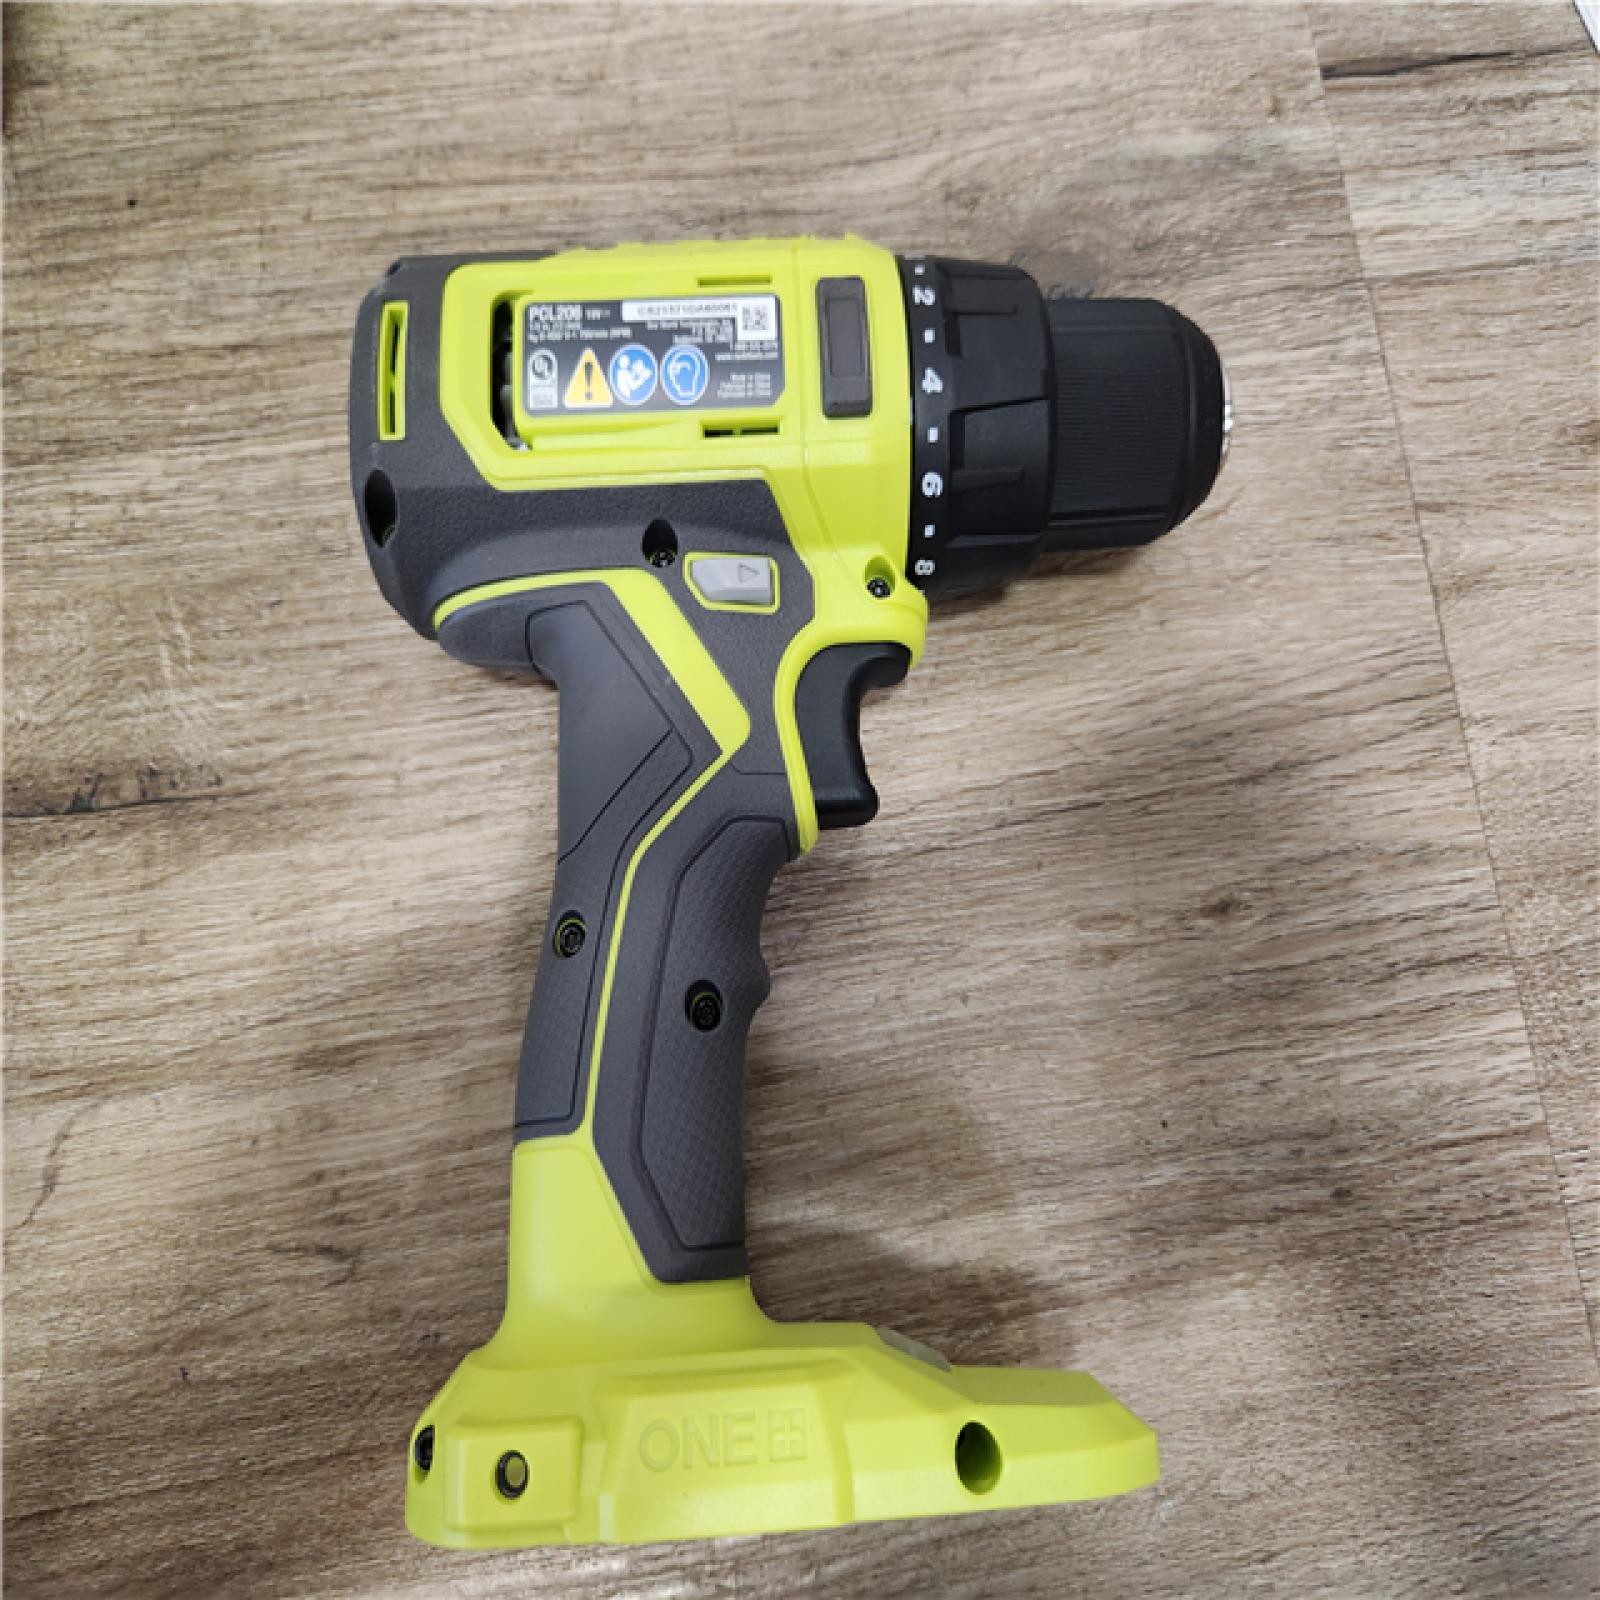 Phoenix Location NEW RYOBI ONE+ 18V Cordless 4-Tool Combo Kit with 1.5 Ah Battery, 4.0 Ah Battery, and Charger